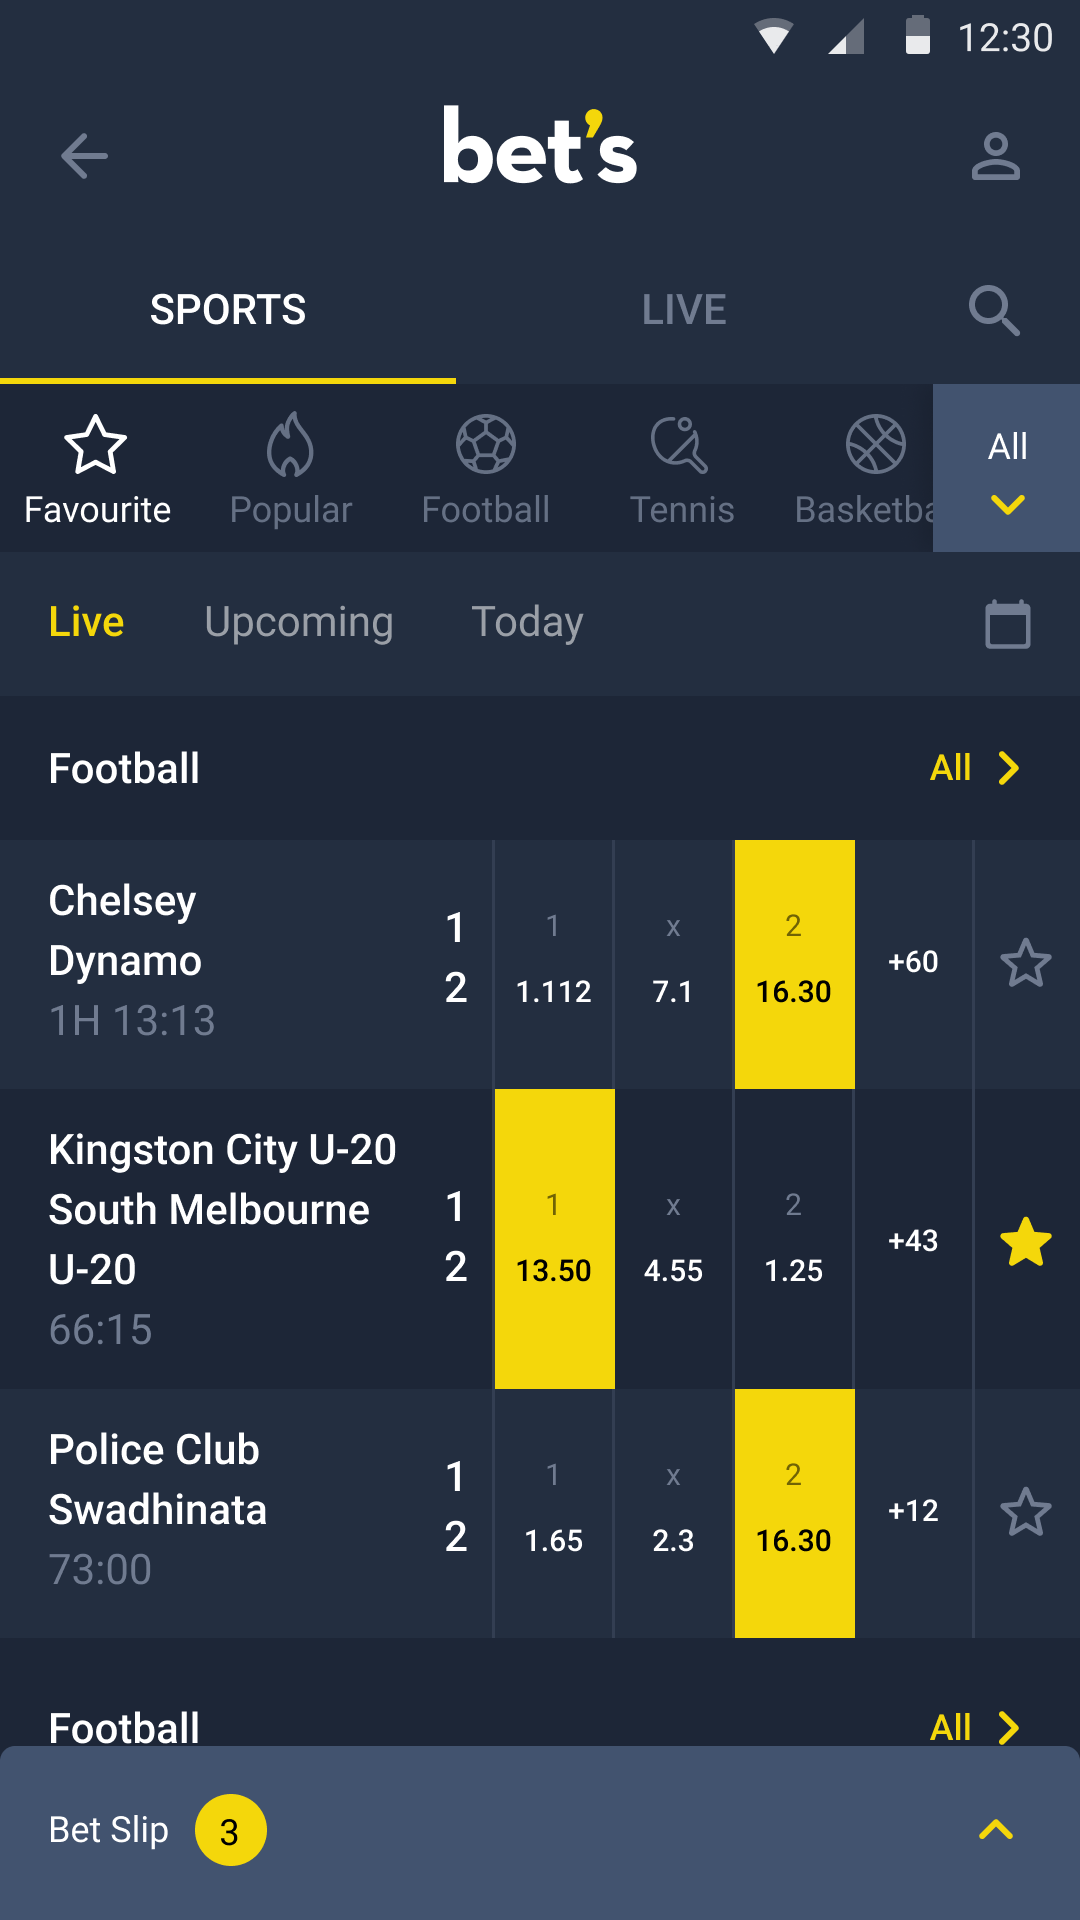 10 Mesmerizing Examples Of Online Betting Apps